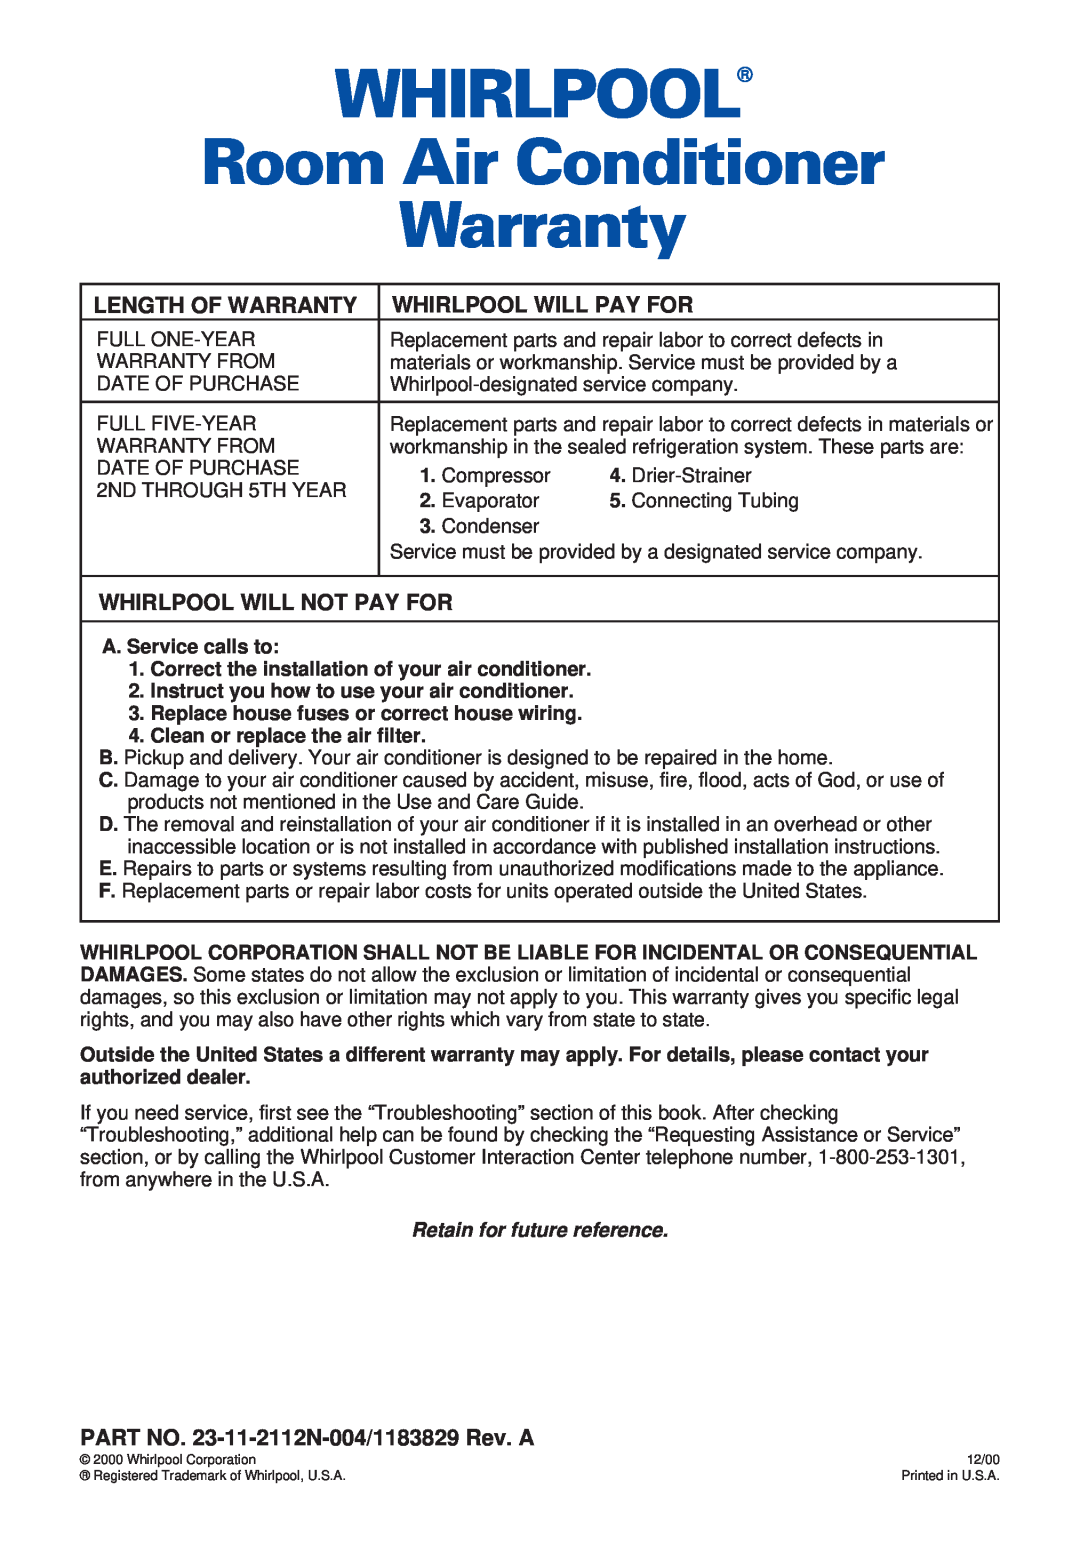 Whirlpool ACS052XH1 warranty Whirlpool, Room Air Conditioner Warranty, Retain for future reference 